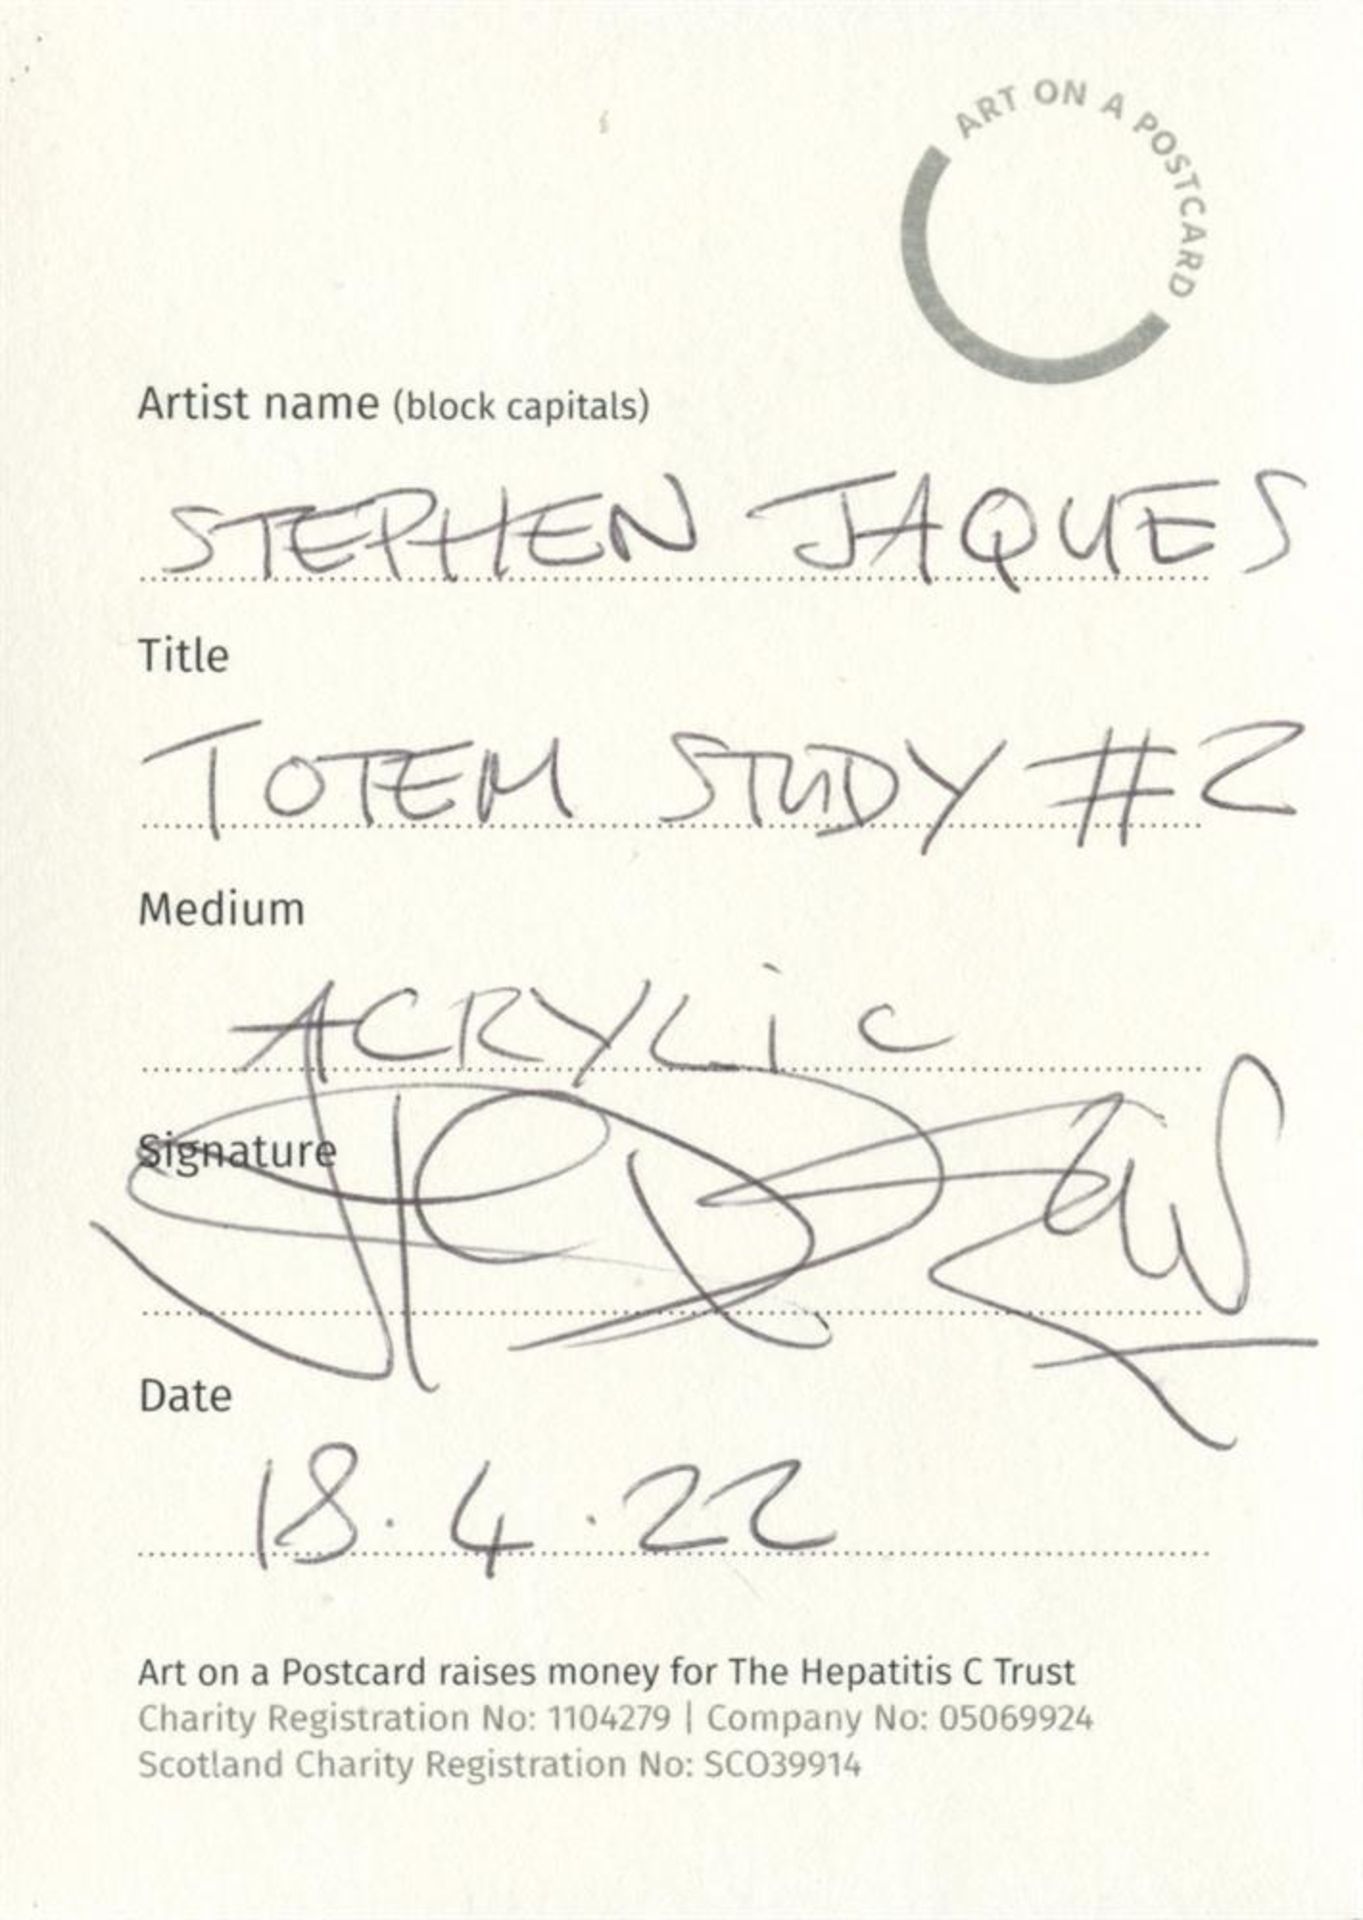 Stephen Jaques, Totem Study 2, 2022 - Image 2 of 3